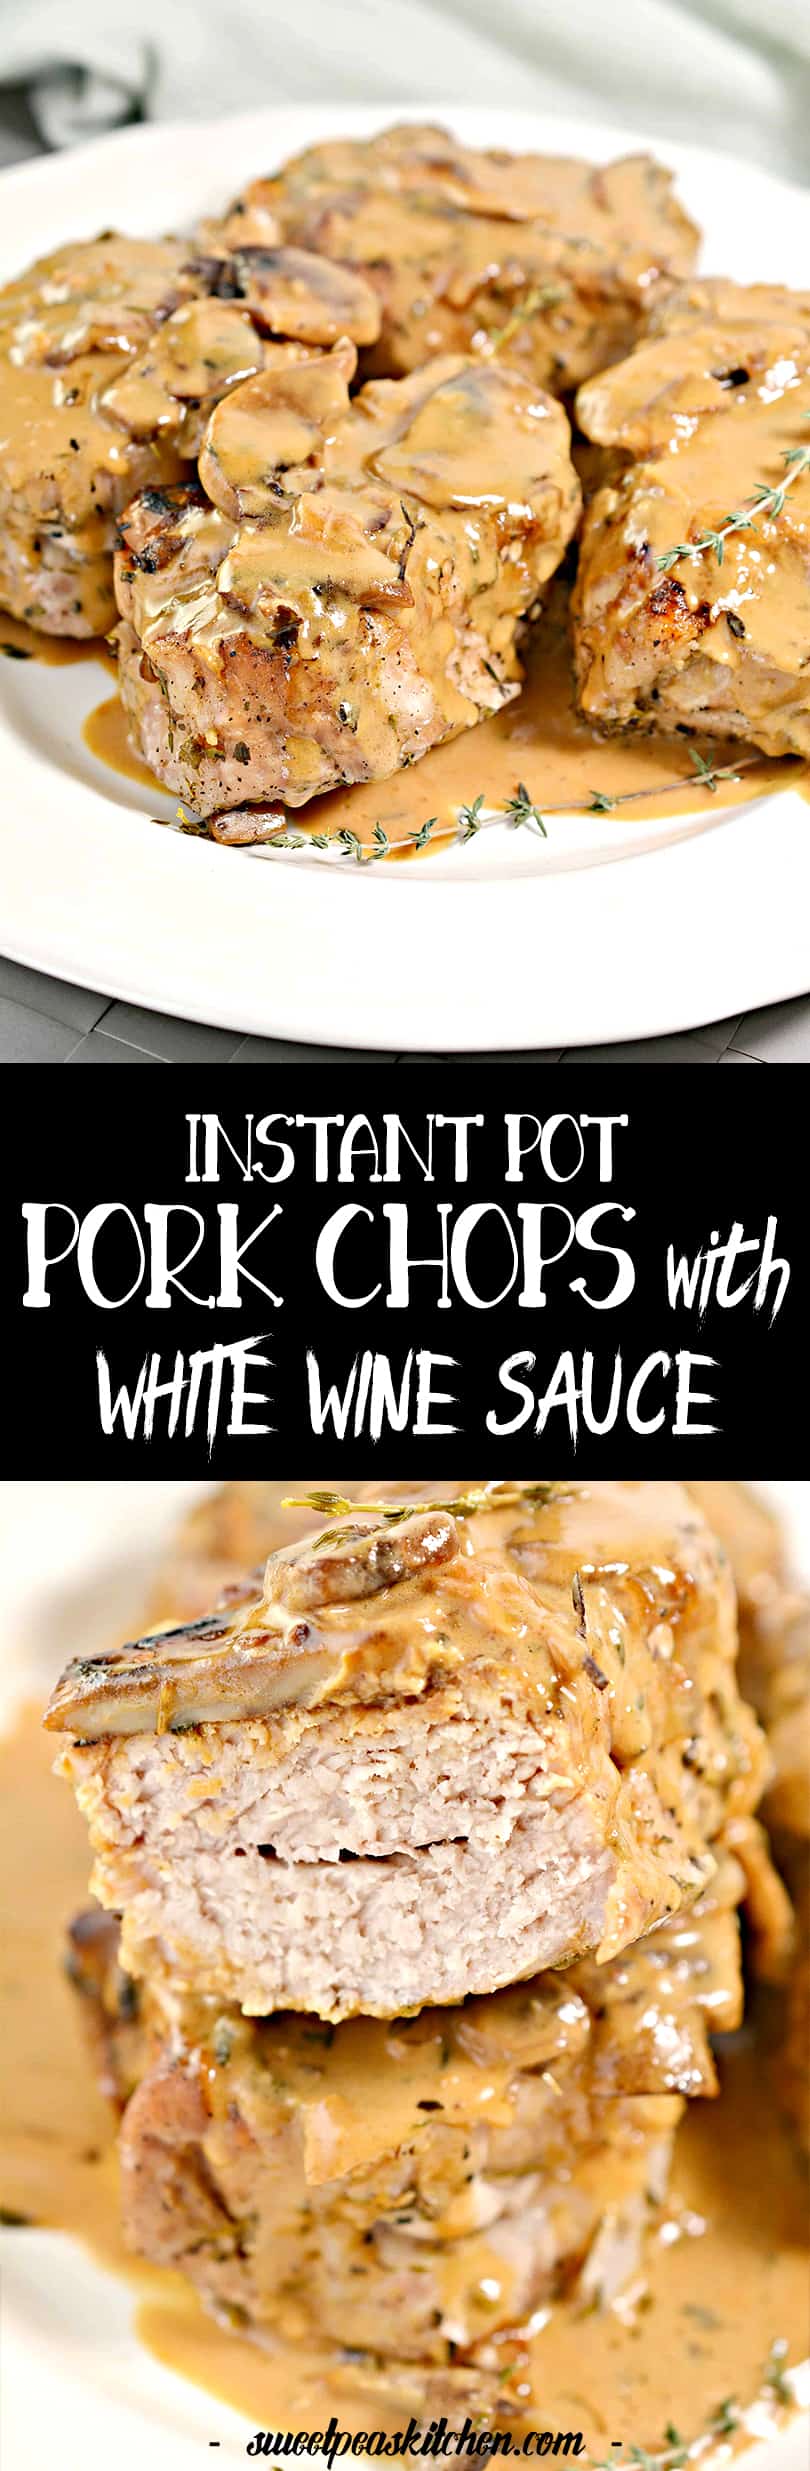 Instant Pot Pork Chops with White Wine Sauce